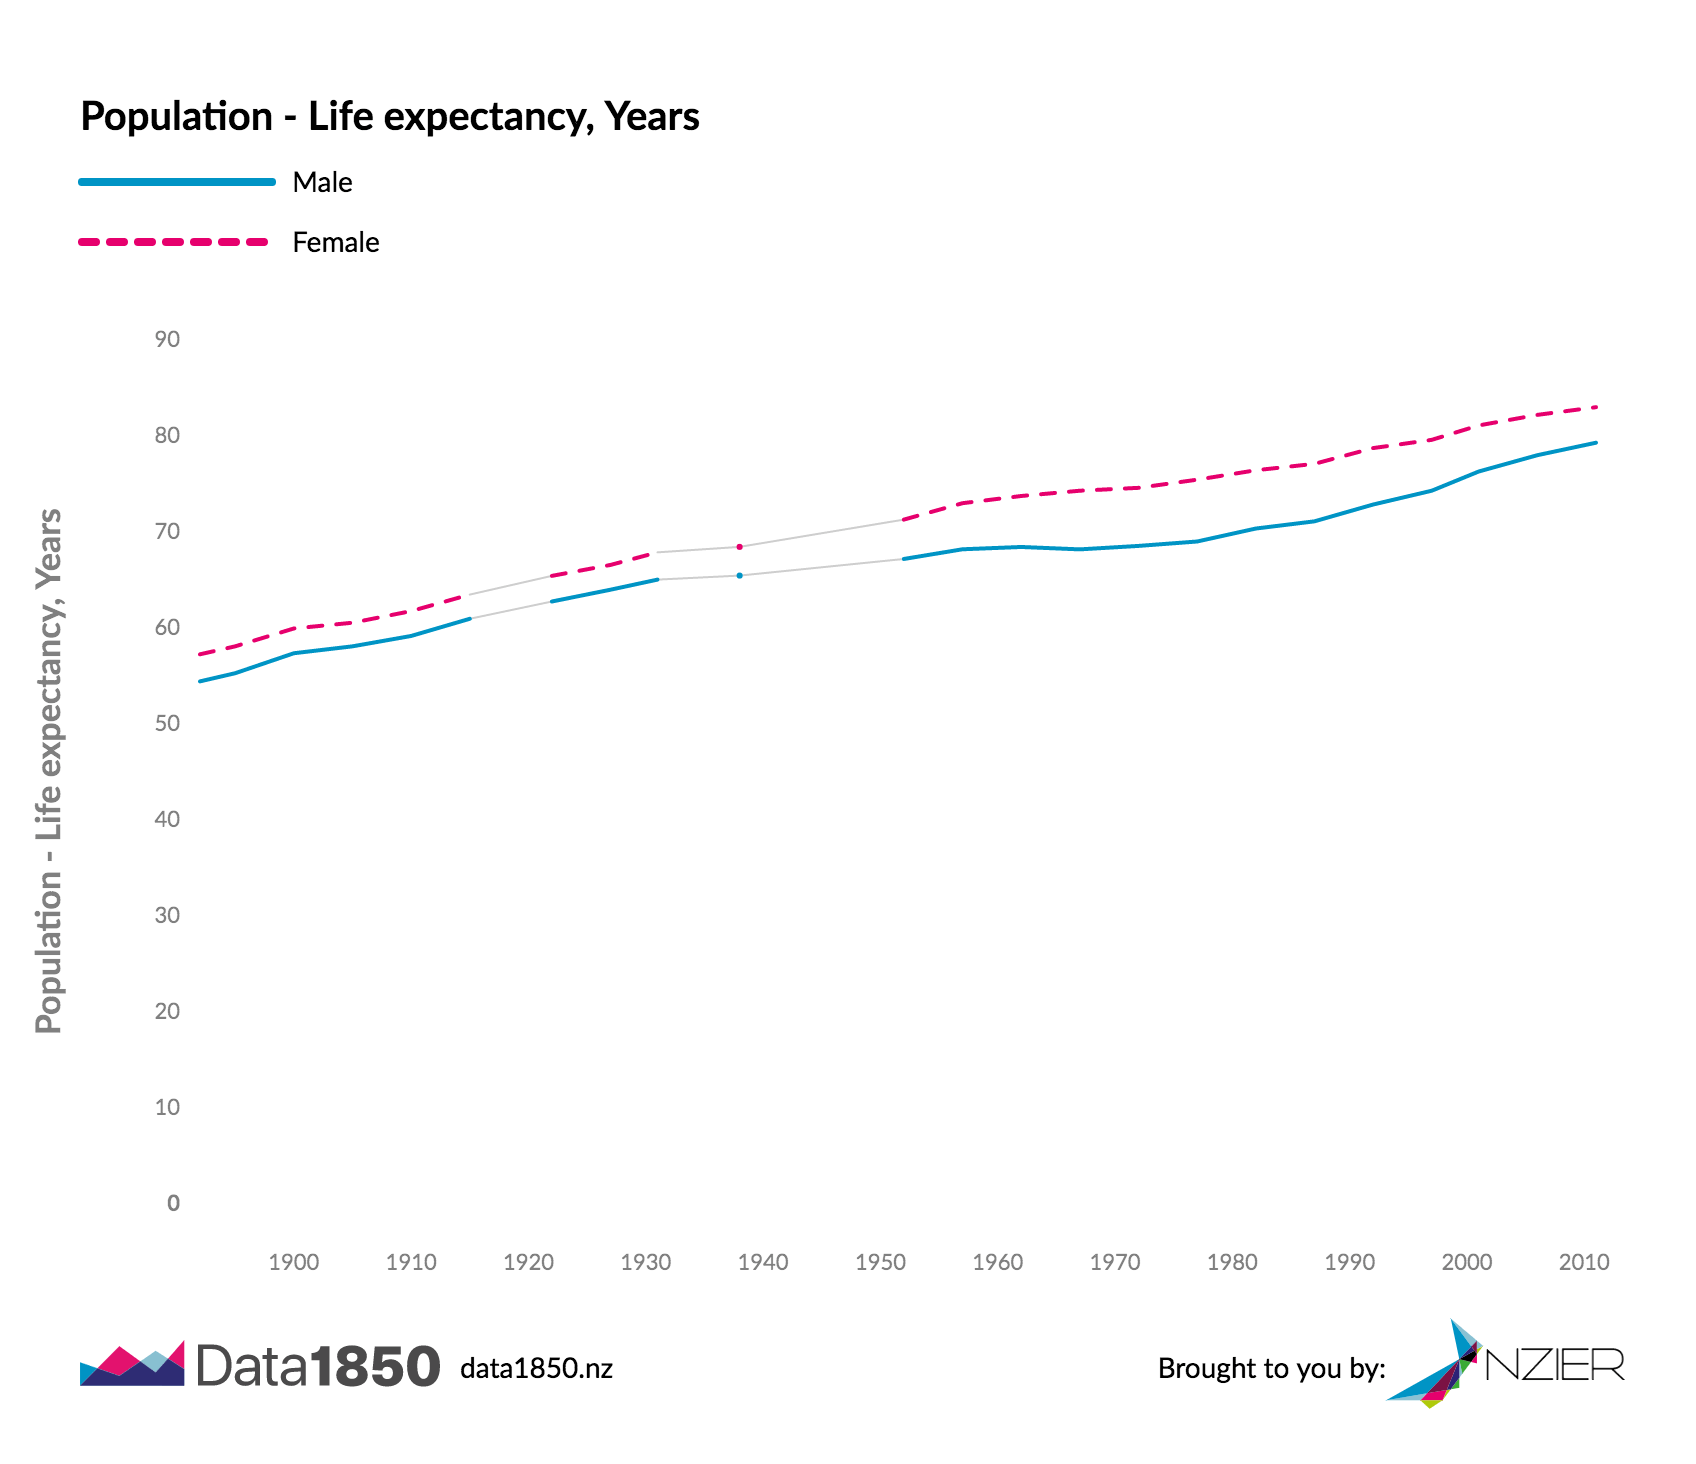 Life expectancy in New Zealand - data from NZIER, data1850.nz